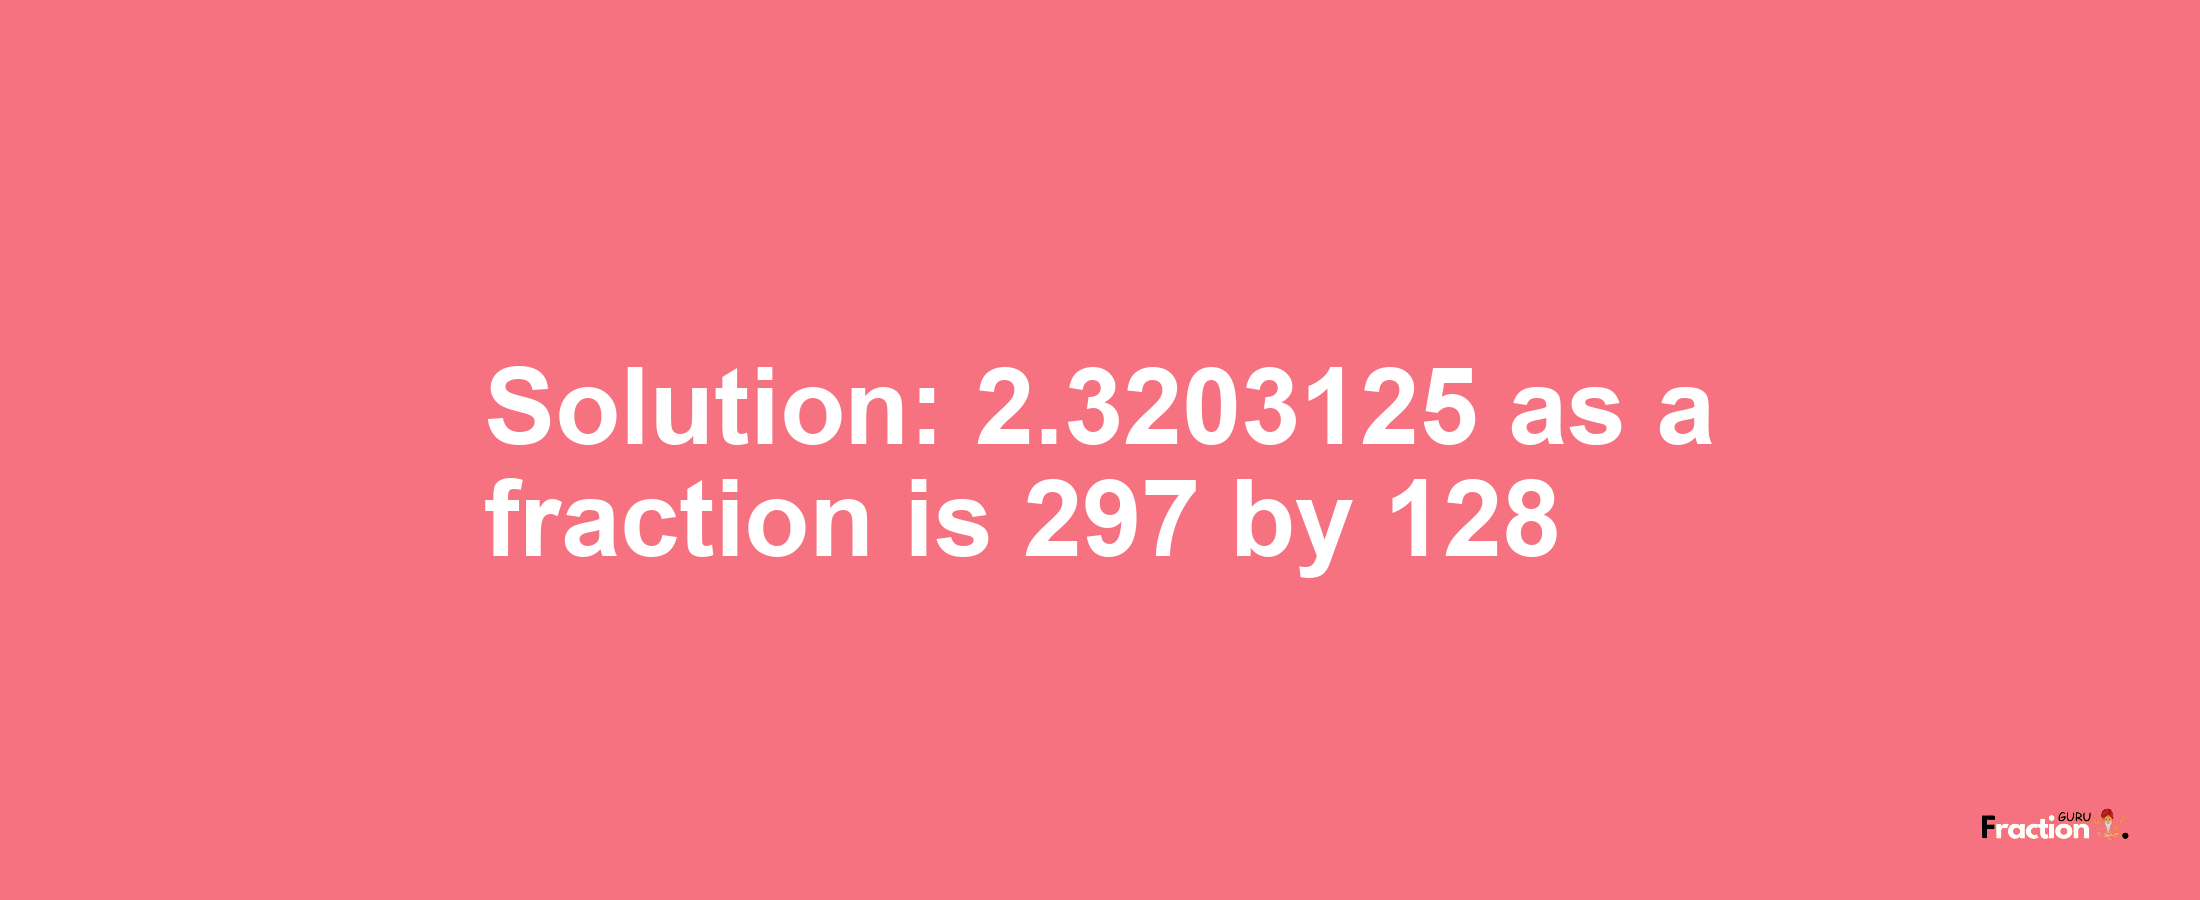 Solution:2.3203125 as a fraction is 297/128